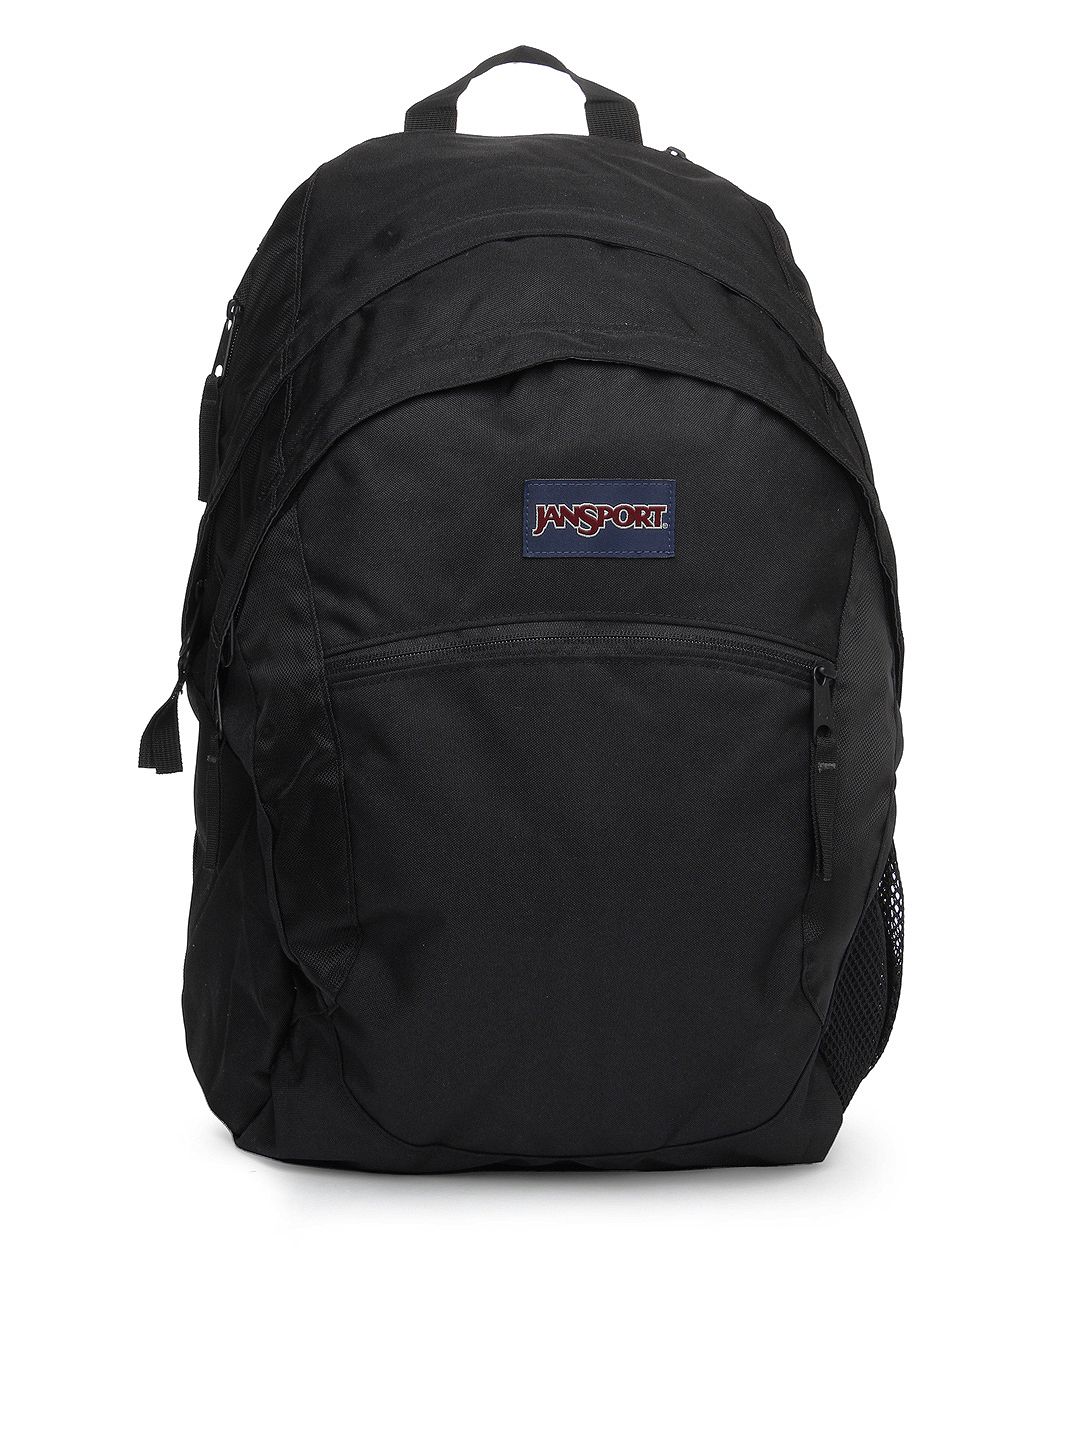 Where Do They Sell Jansport Backpacks For Cheap | Click Backpacks